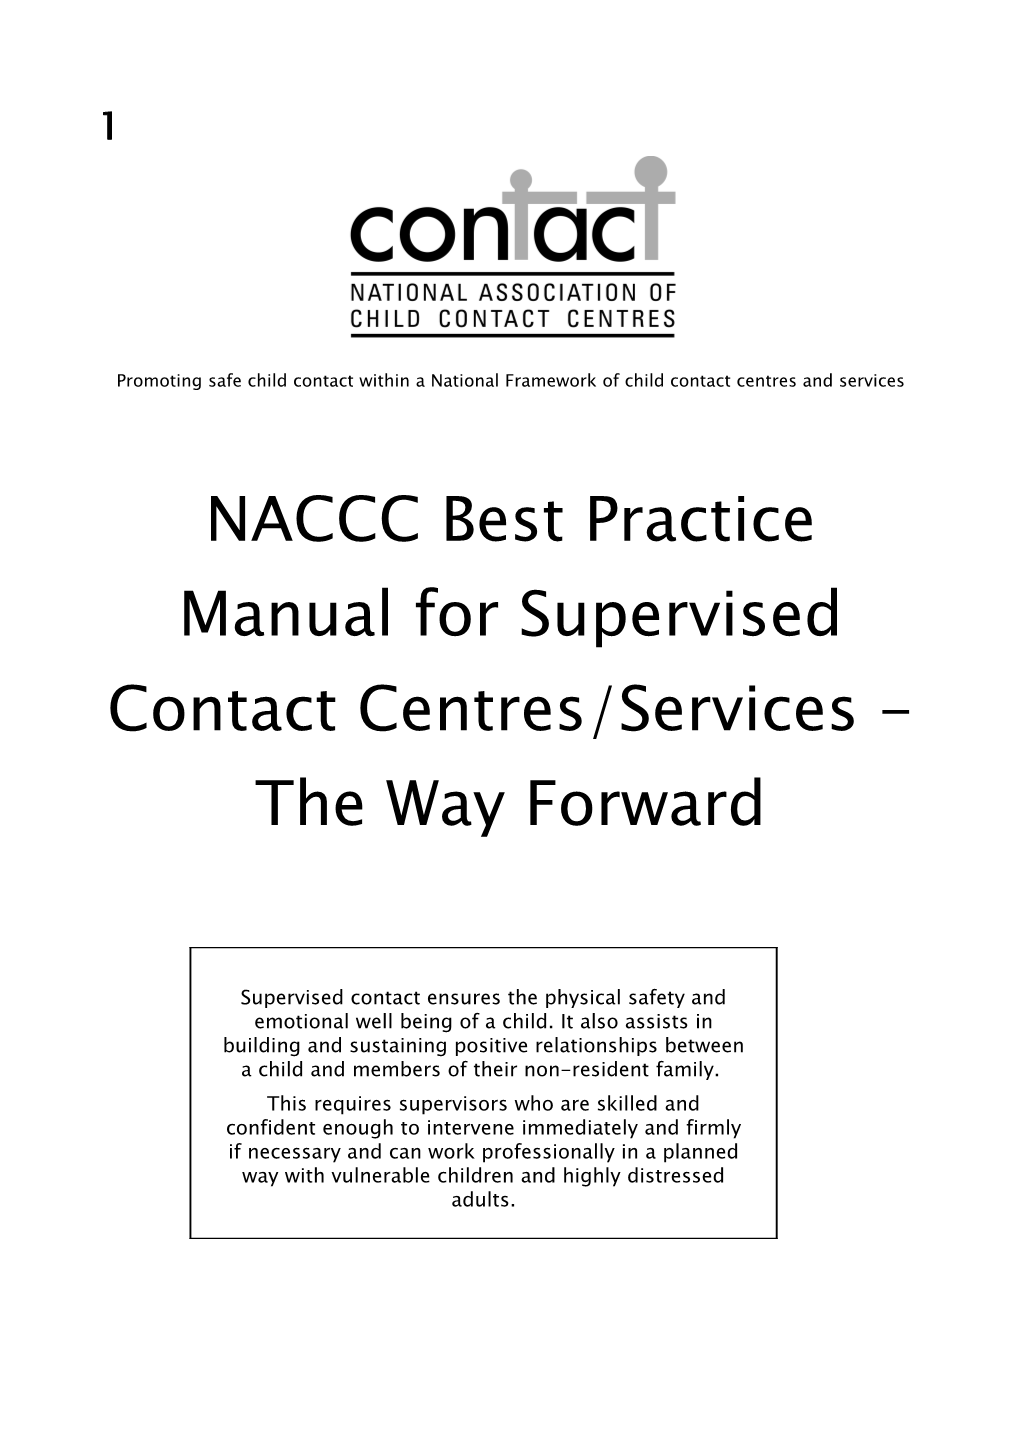 National Association of Child Contact Centres and Services